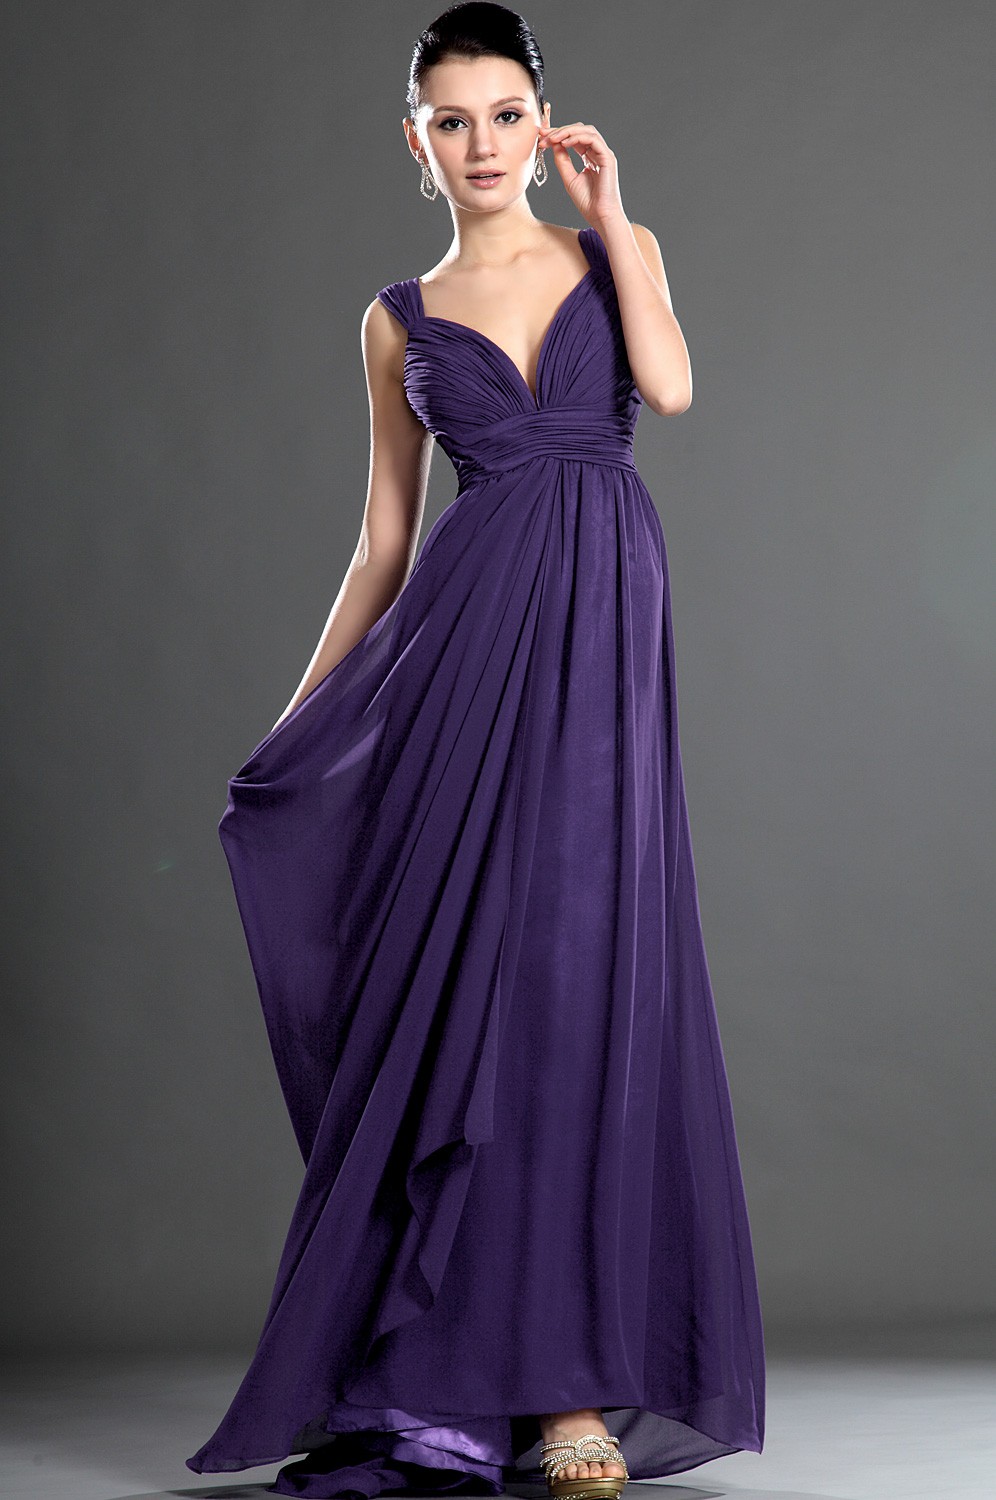 Best Purple Cocktail Dresses For Weddings in the world Check it out now 